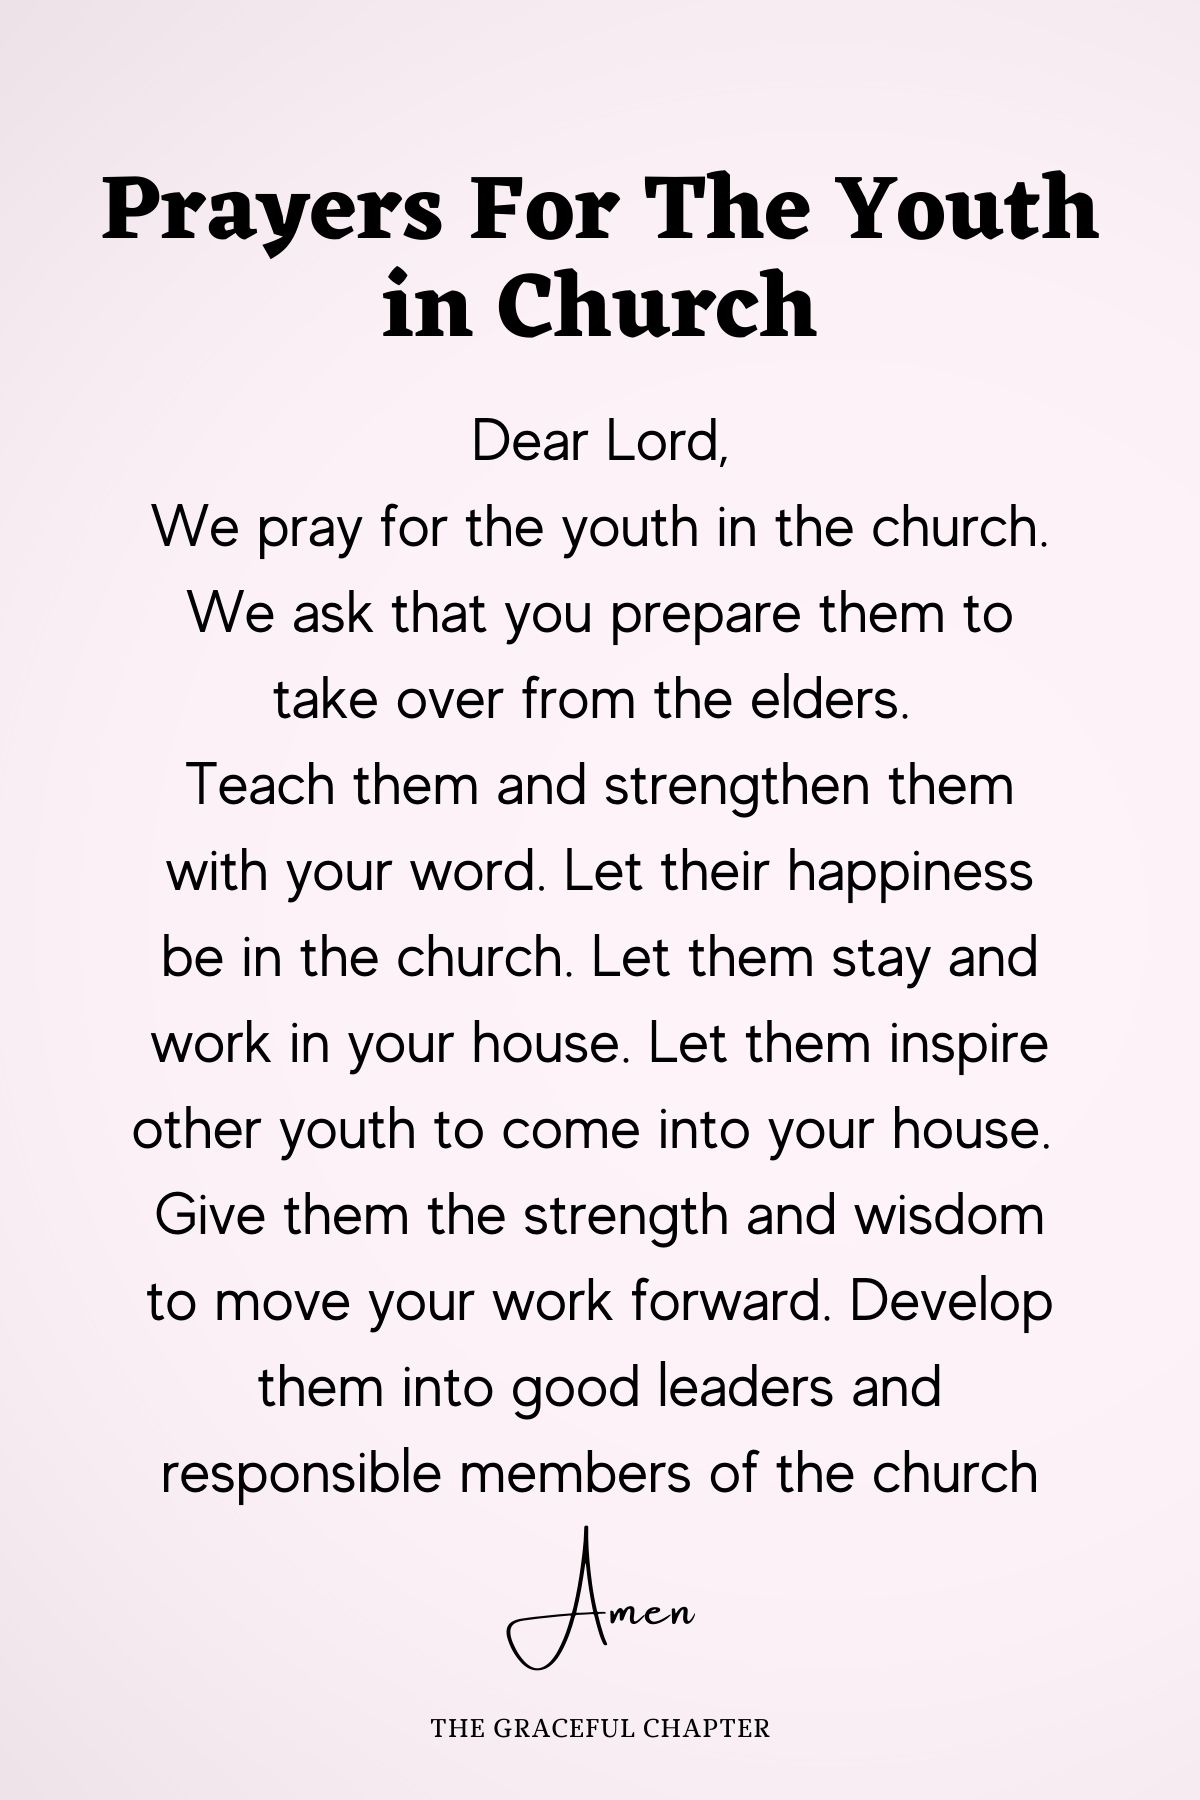 Prayers for the youth in church